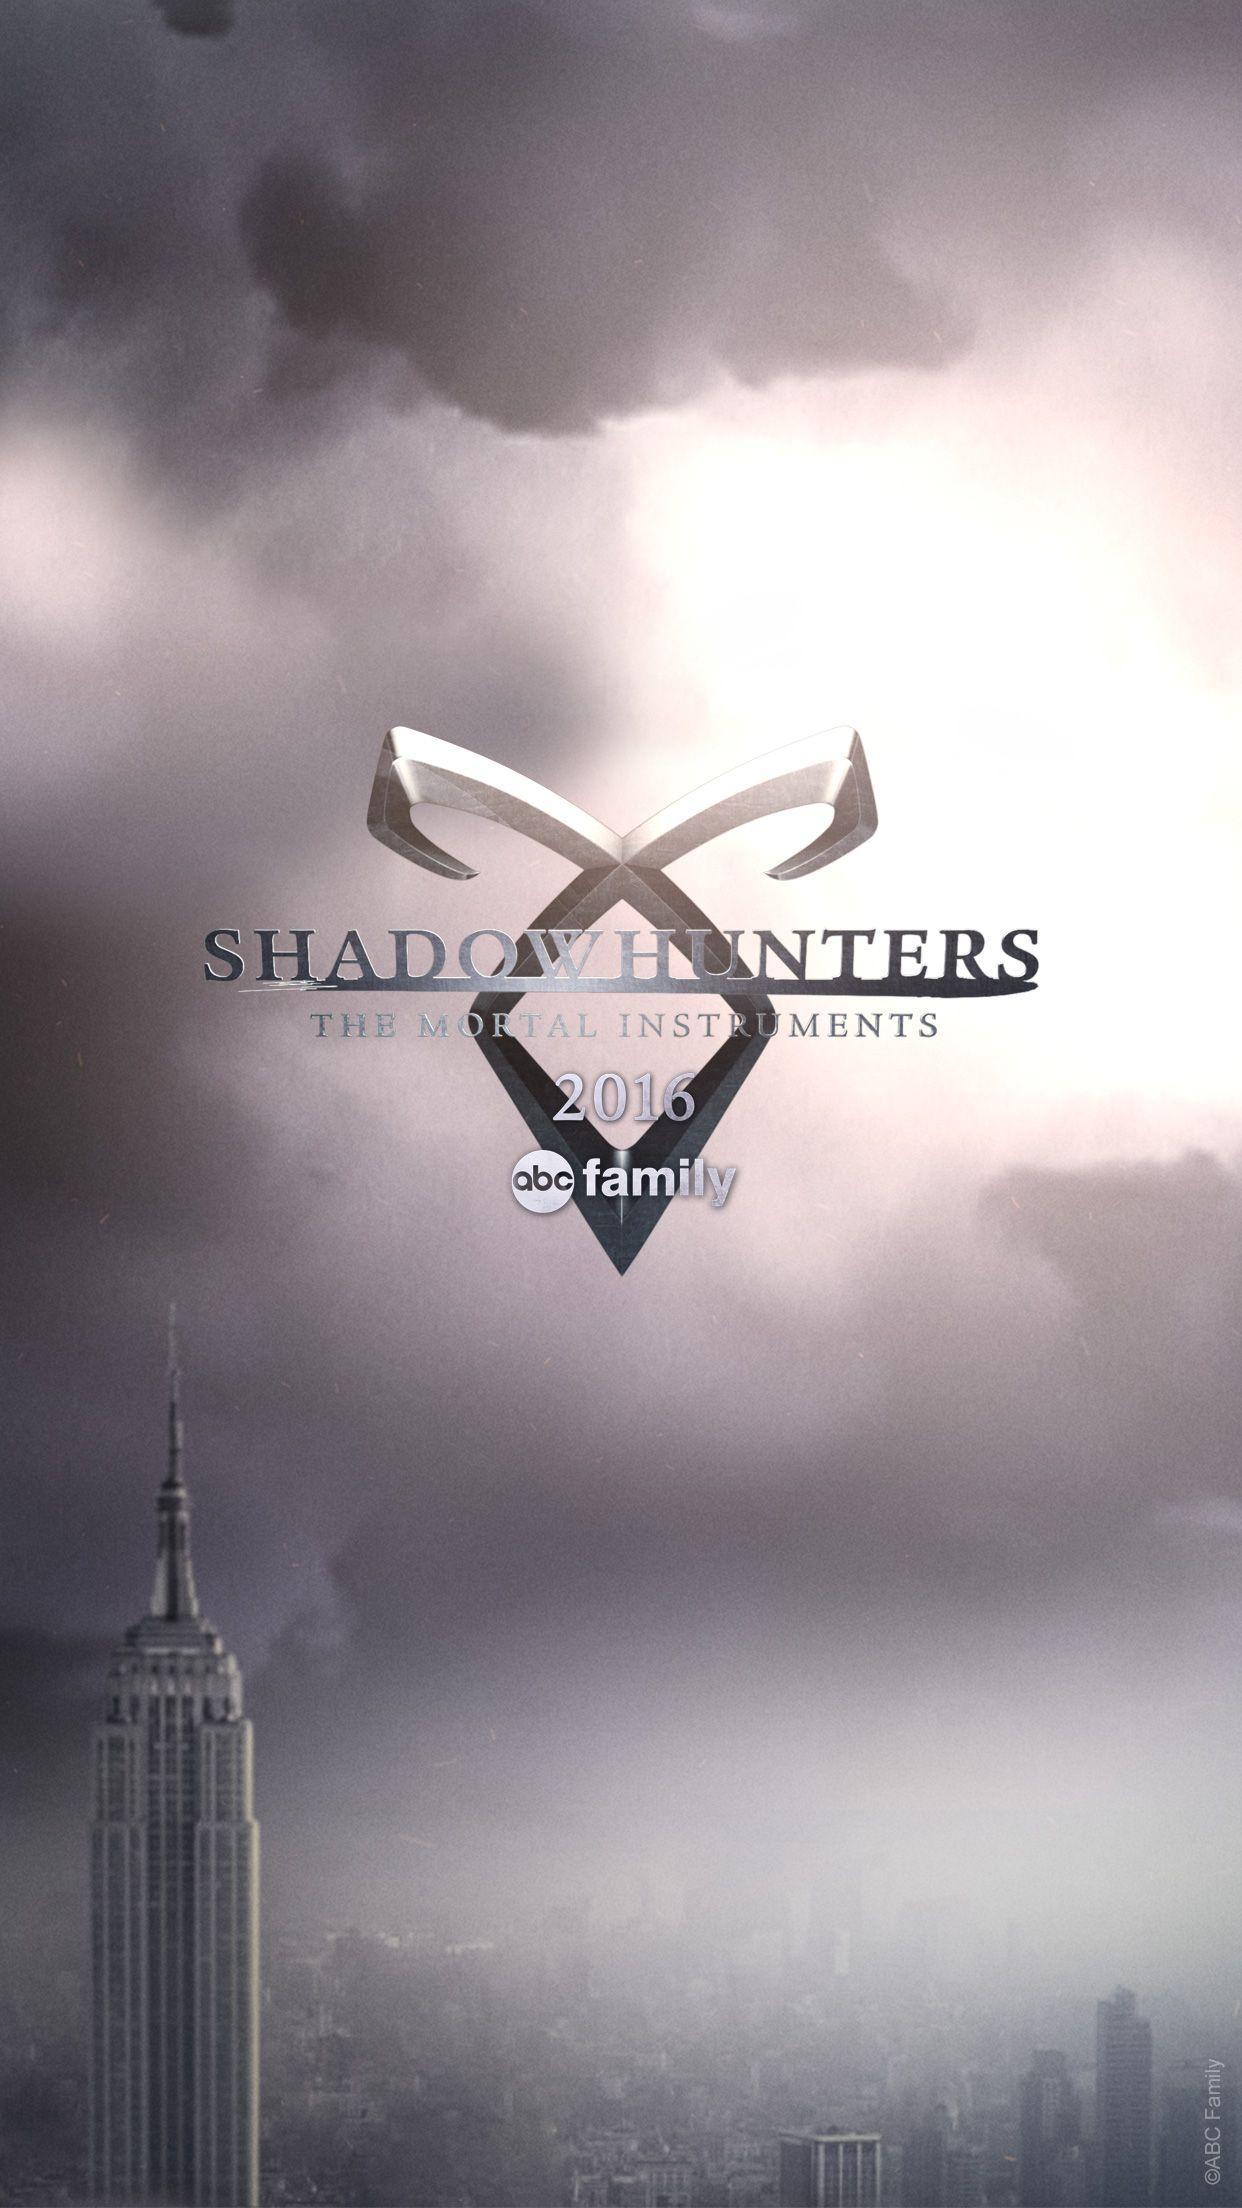 Shadowhunters Mobile Background to Rock Your World